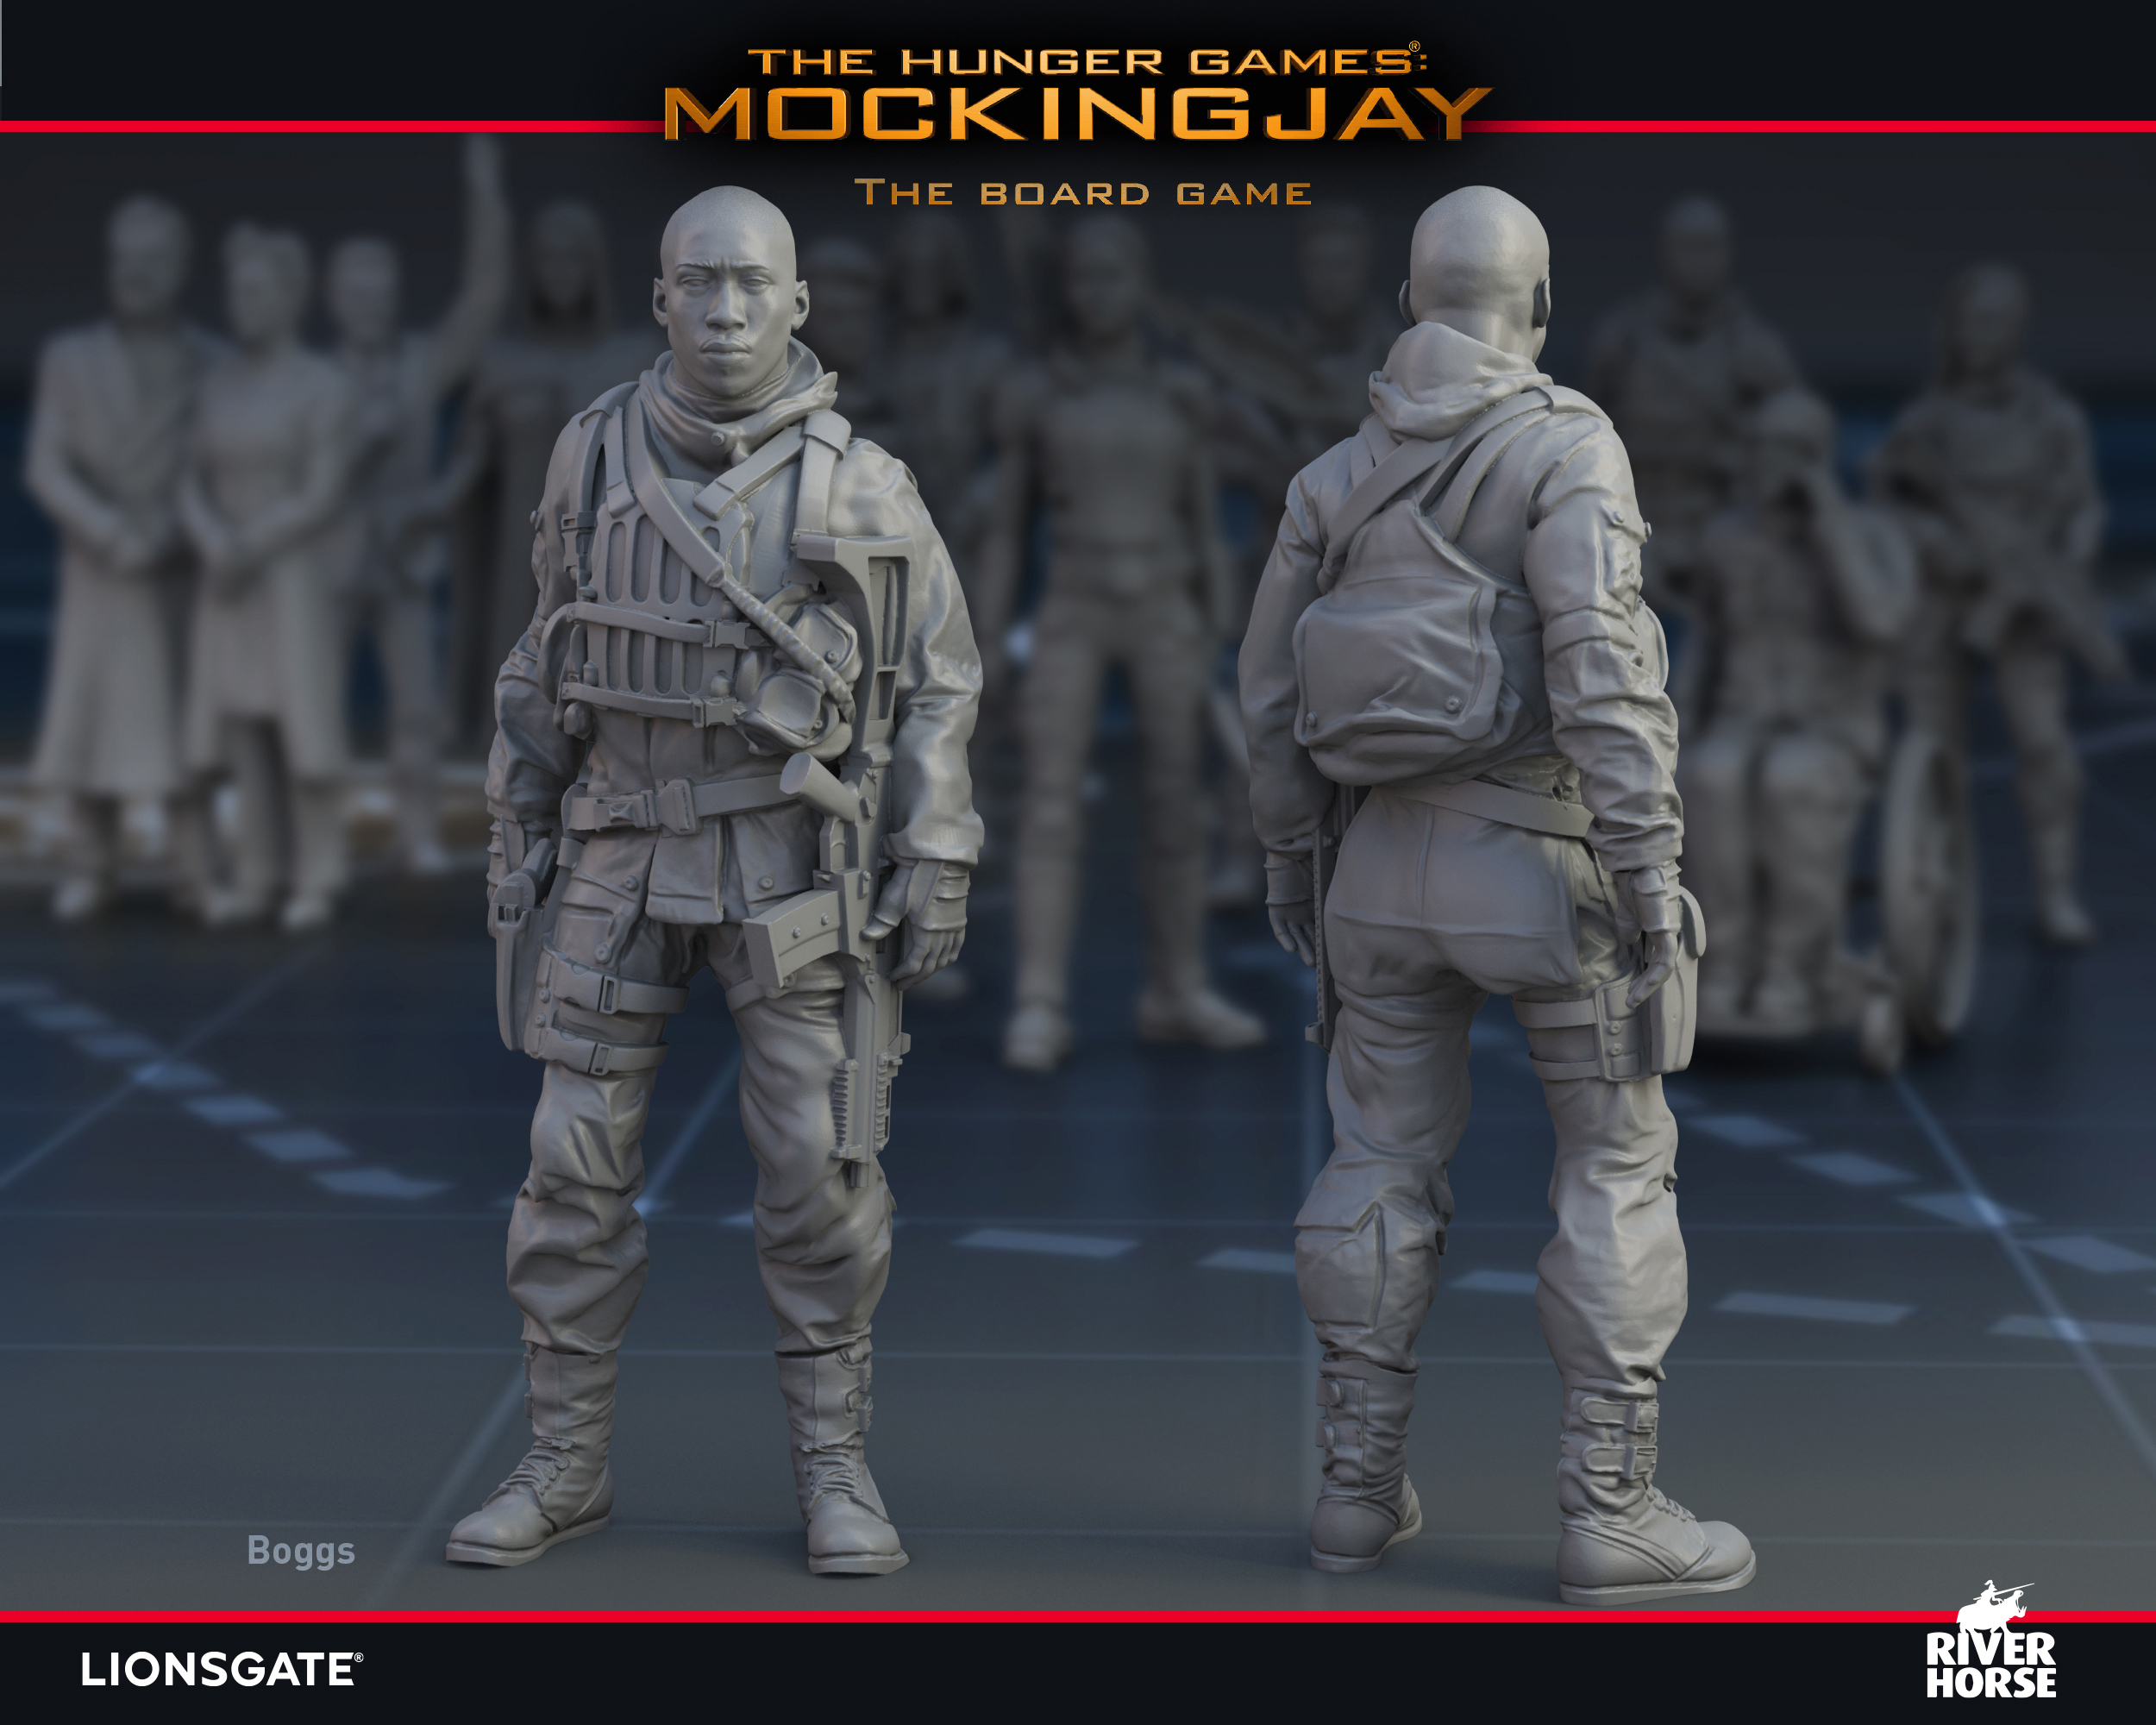 Render of Boggs for The Hunger Games: Mockingjay - The Board Game by River Horse